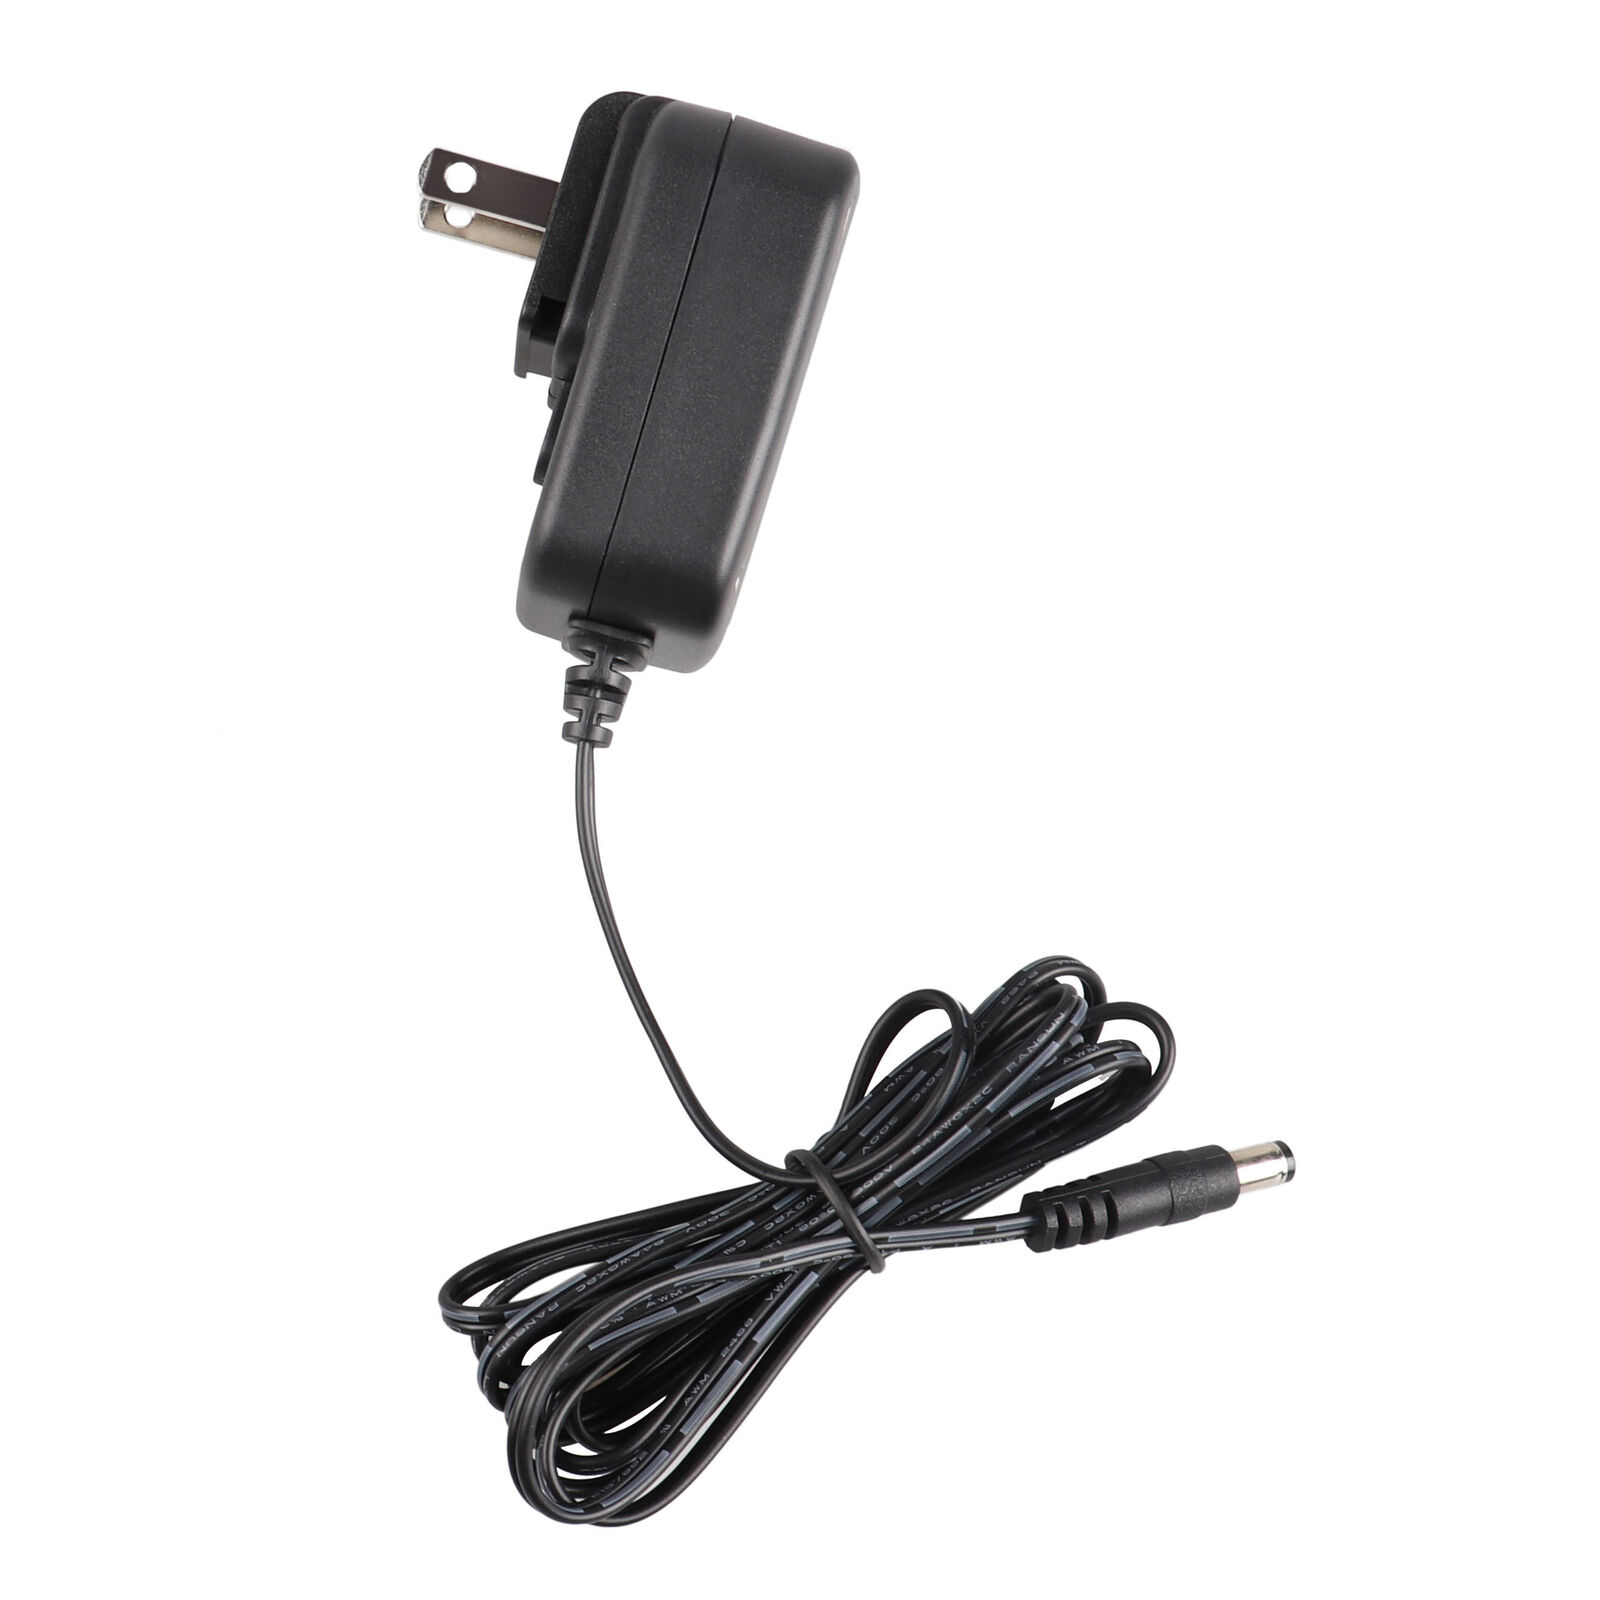 AC Adapter for G-Technology G-Drive G1 0G03902 2TB GTech Power Supply Cord Cable This product is good for the following